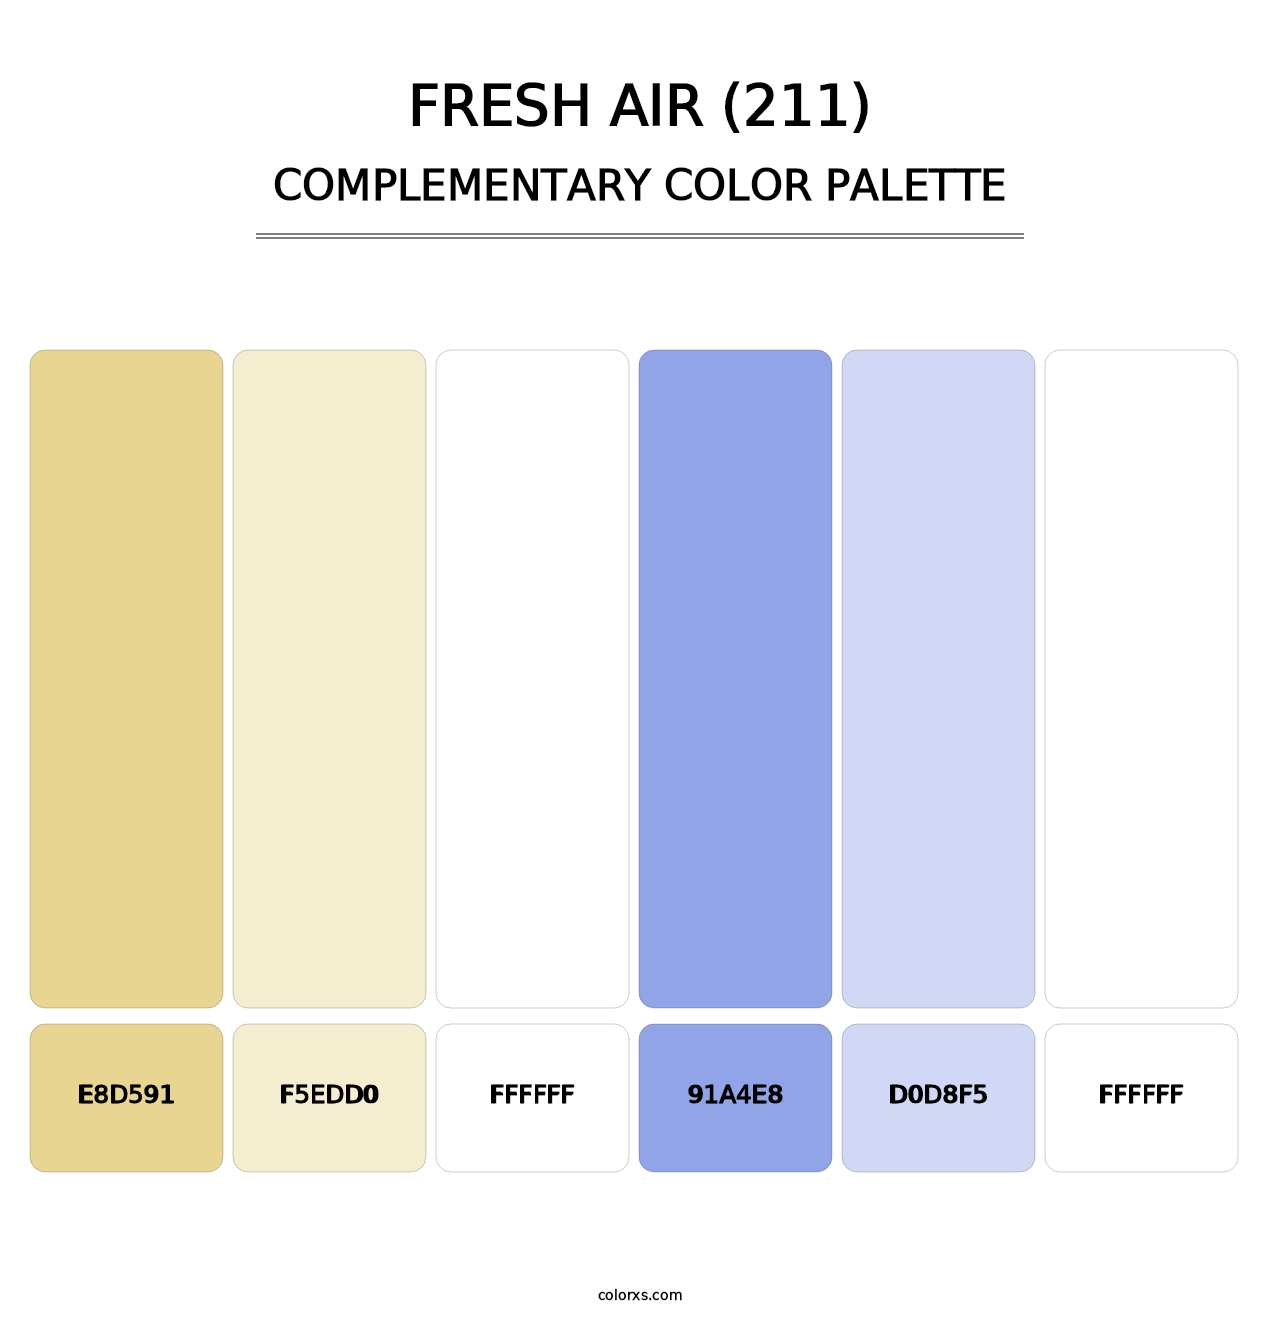 Fresh Air (211) - Complementary Color Palette